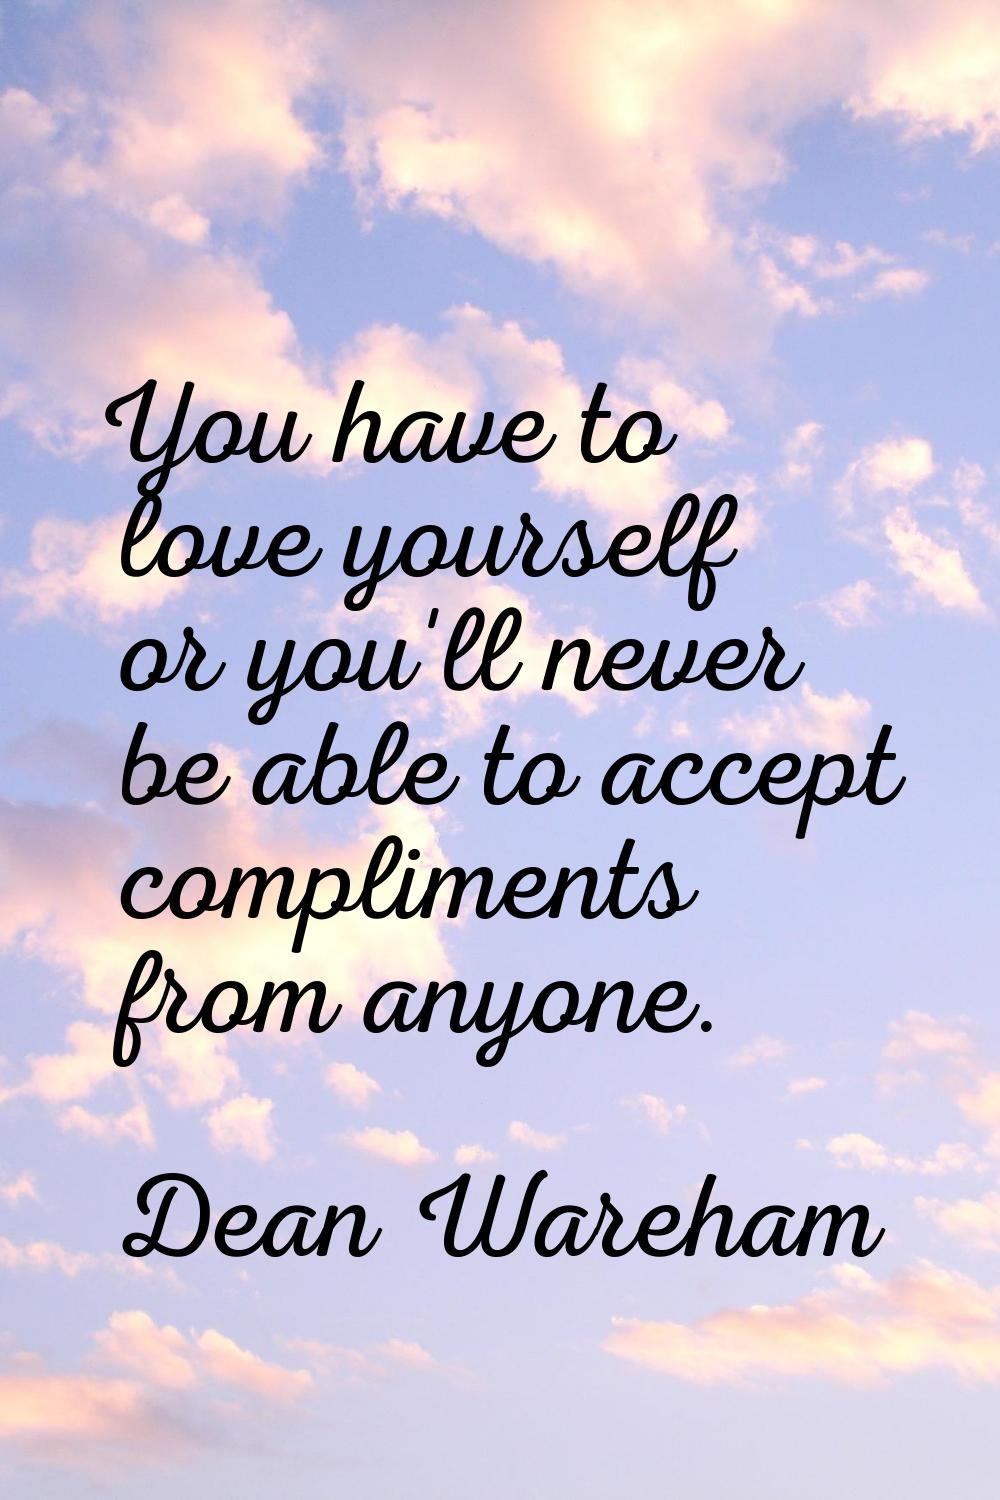 You have to love yourself or you'll never be able to accept compliments from anyone.